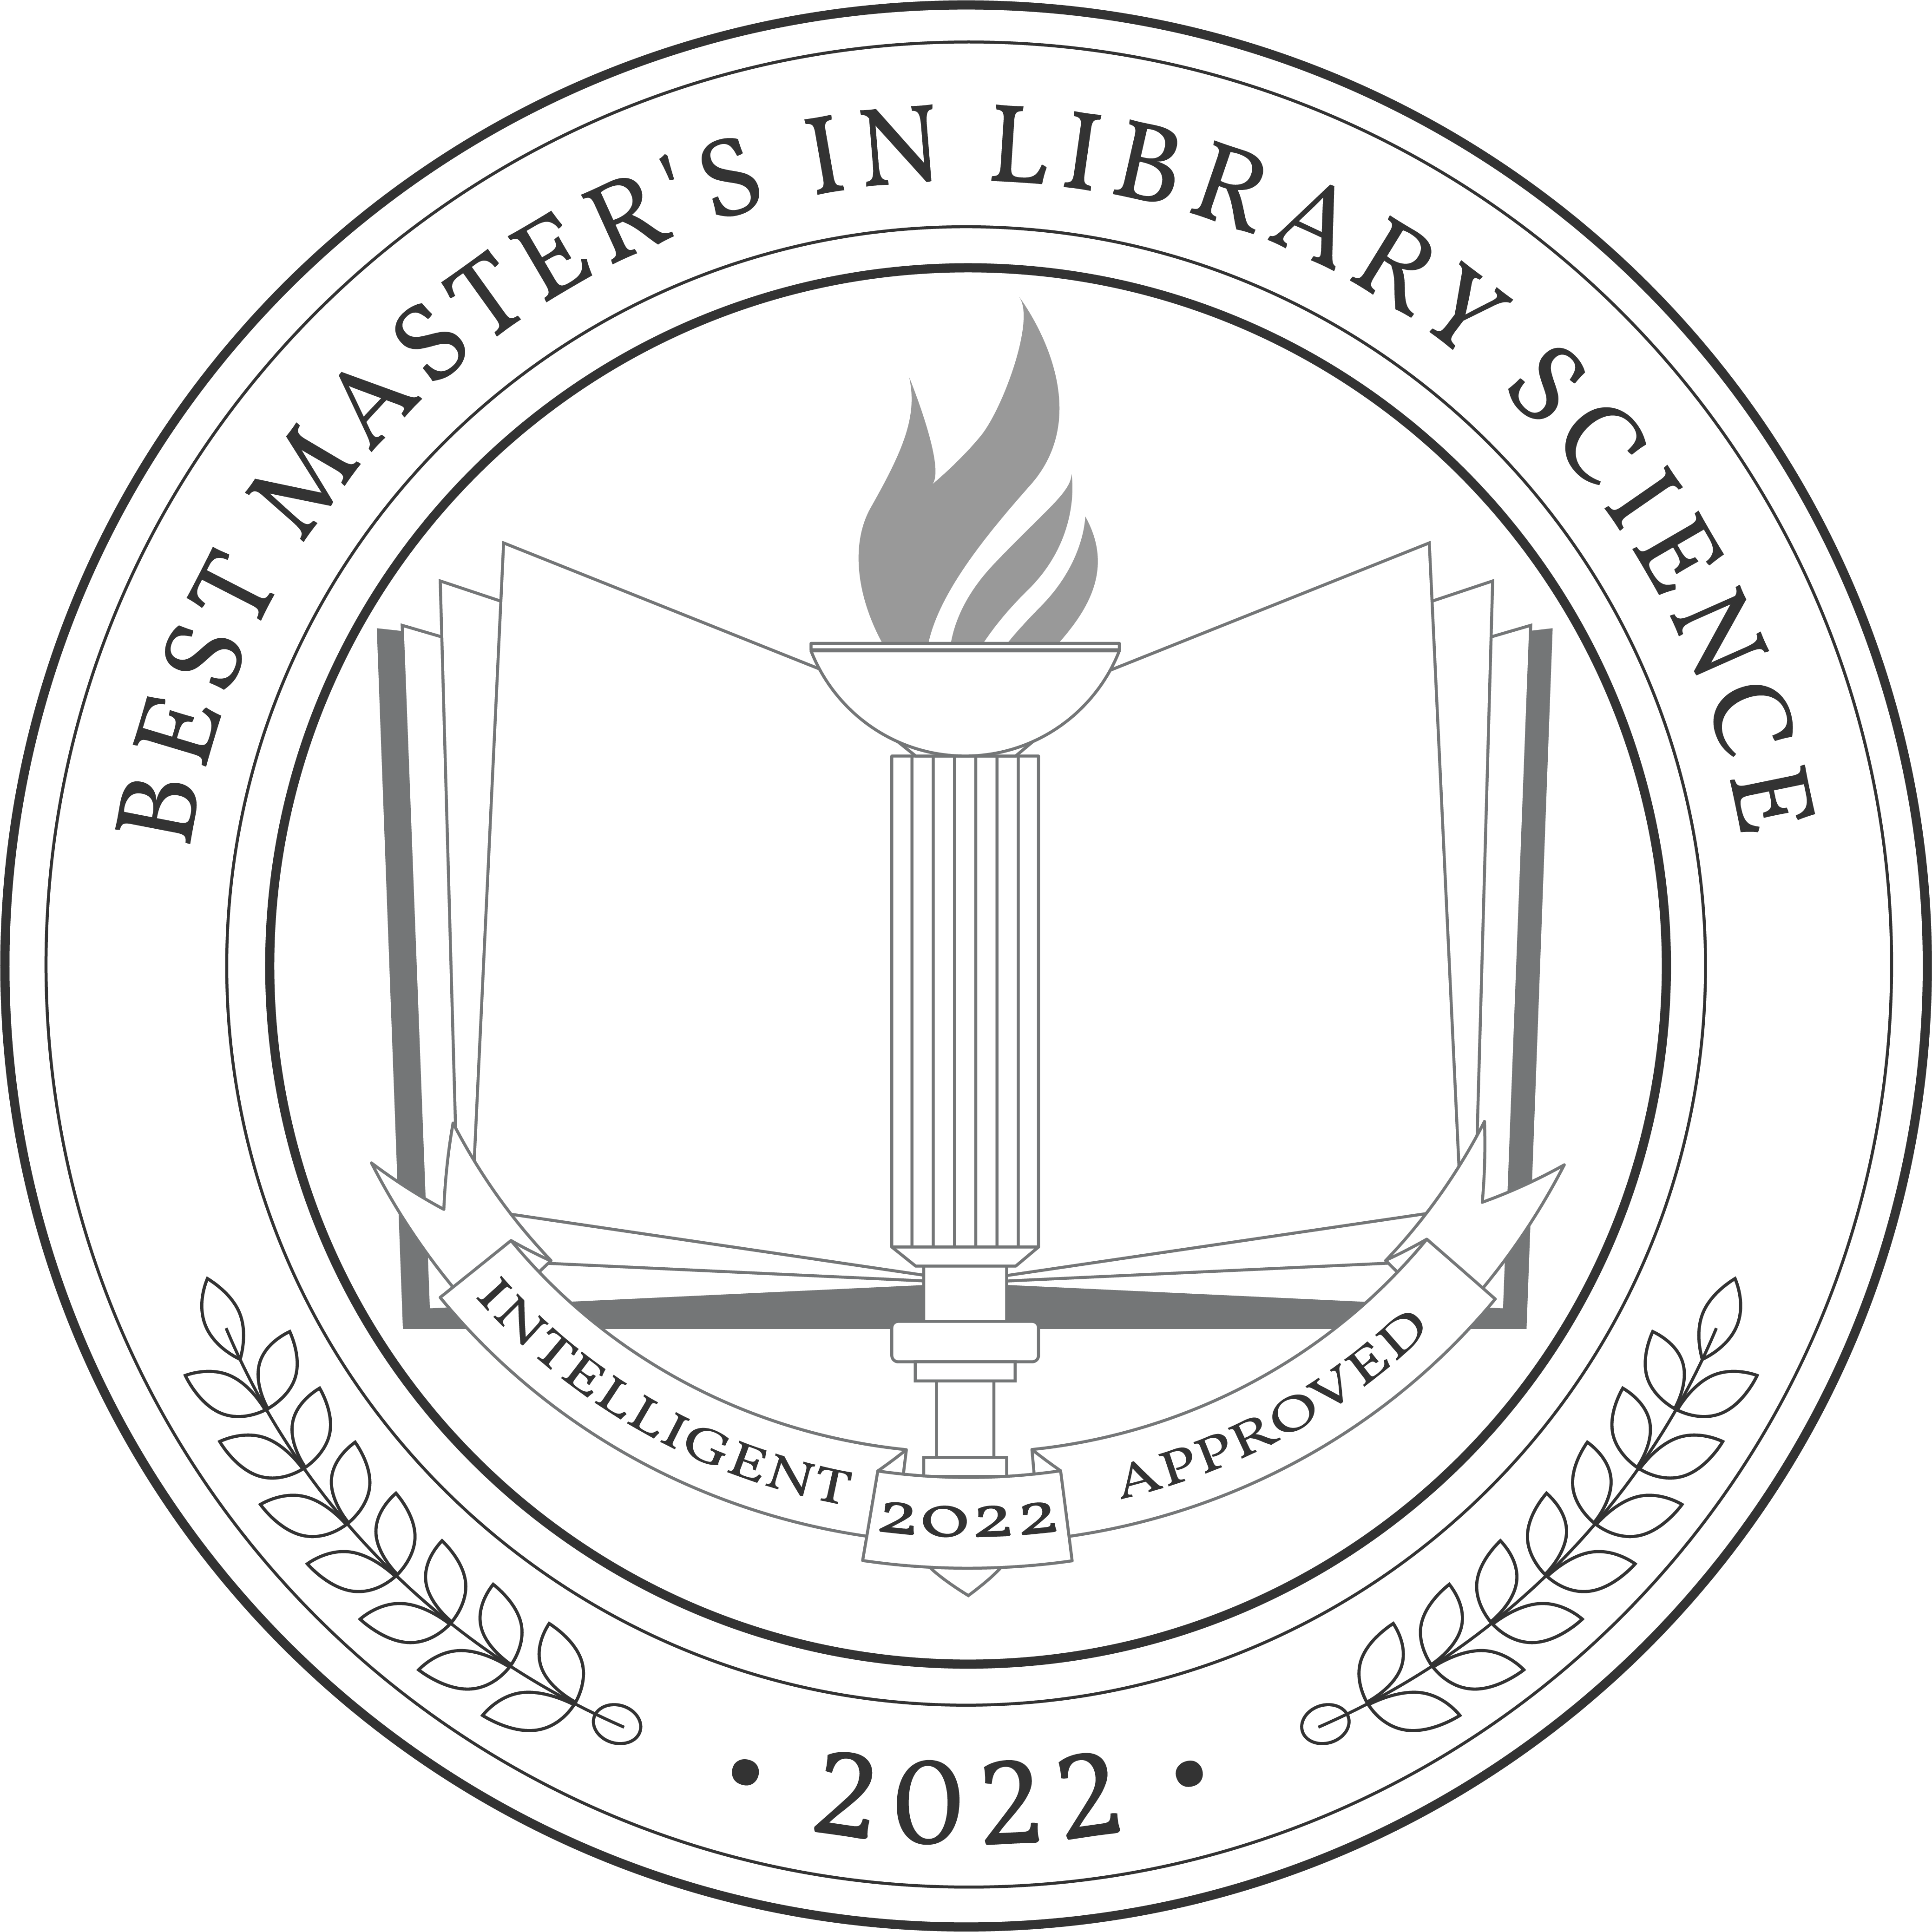 Best Master's in Library Science Badge-1